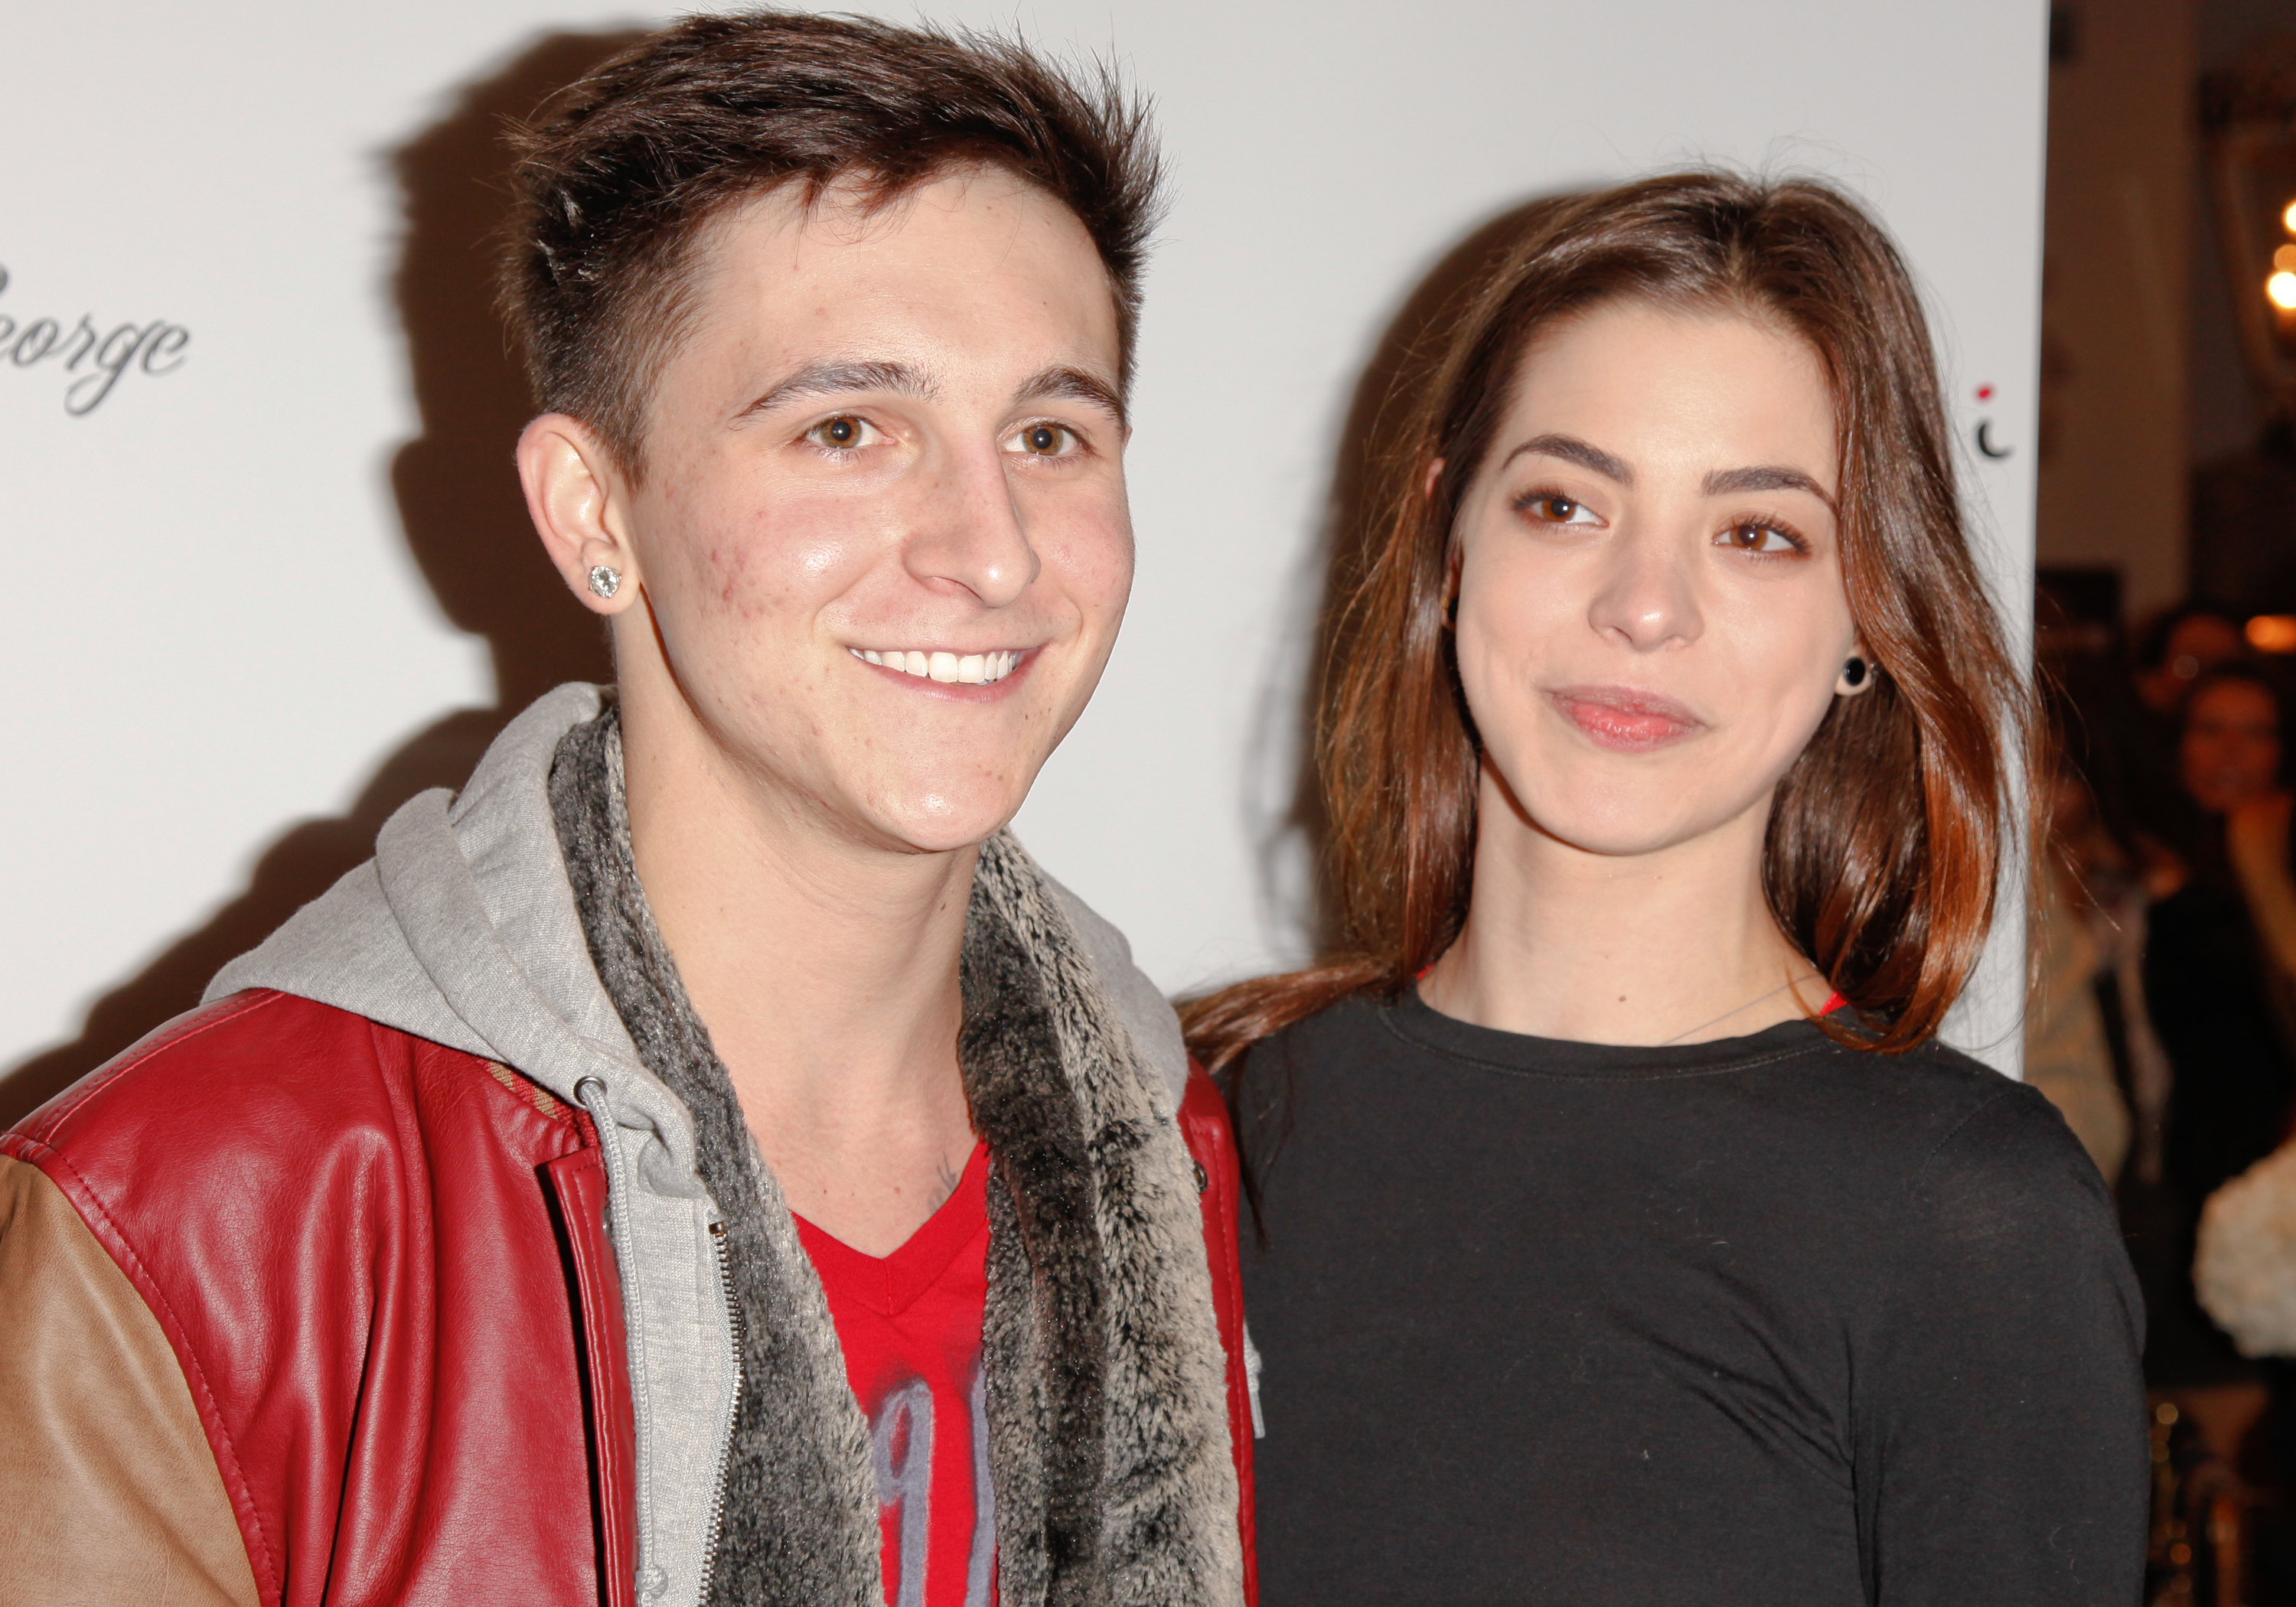 Mitchel Musso and Gia Mantegna attend the "Q" Jewelry line launch party at Dari Boutique on January 23, 2012, in Studio City, California. | Source: Getty Images